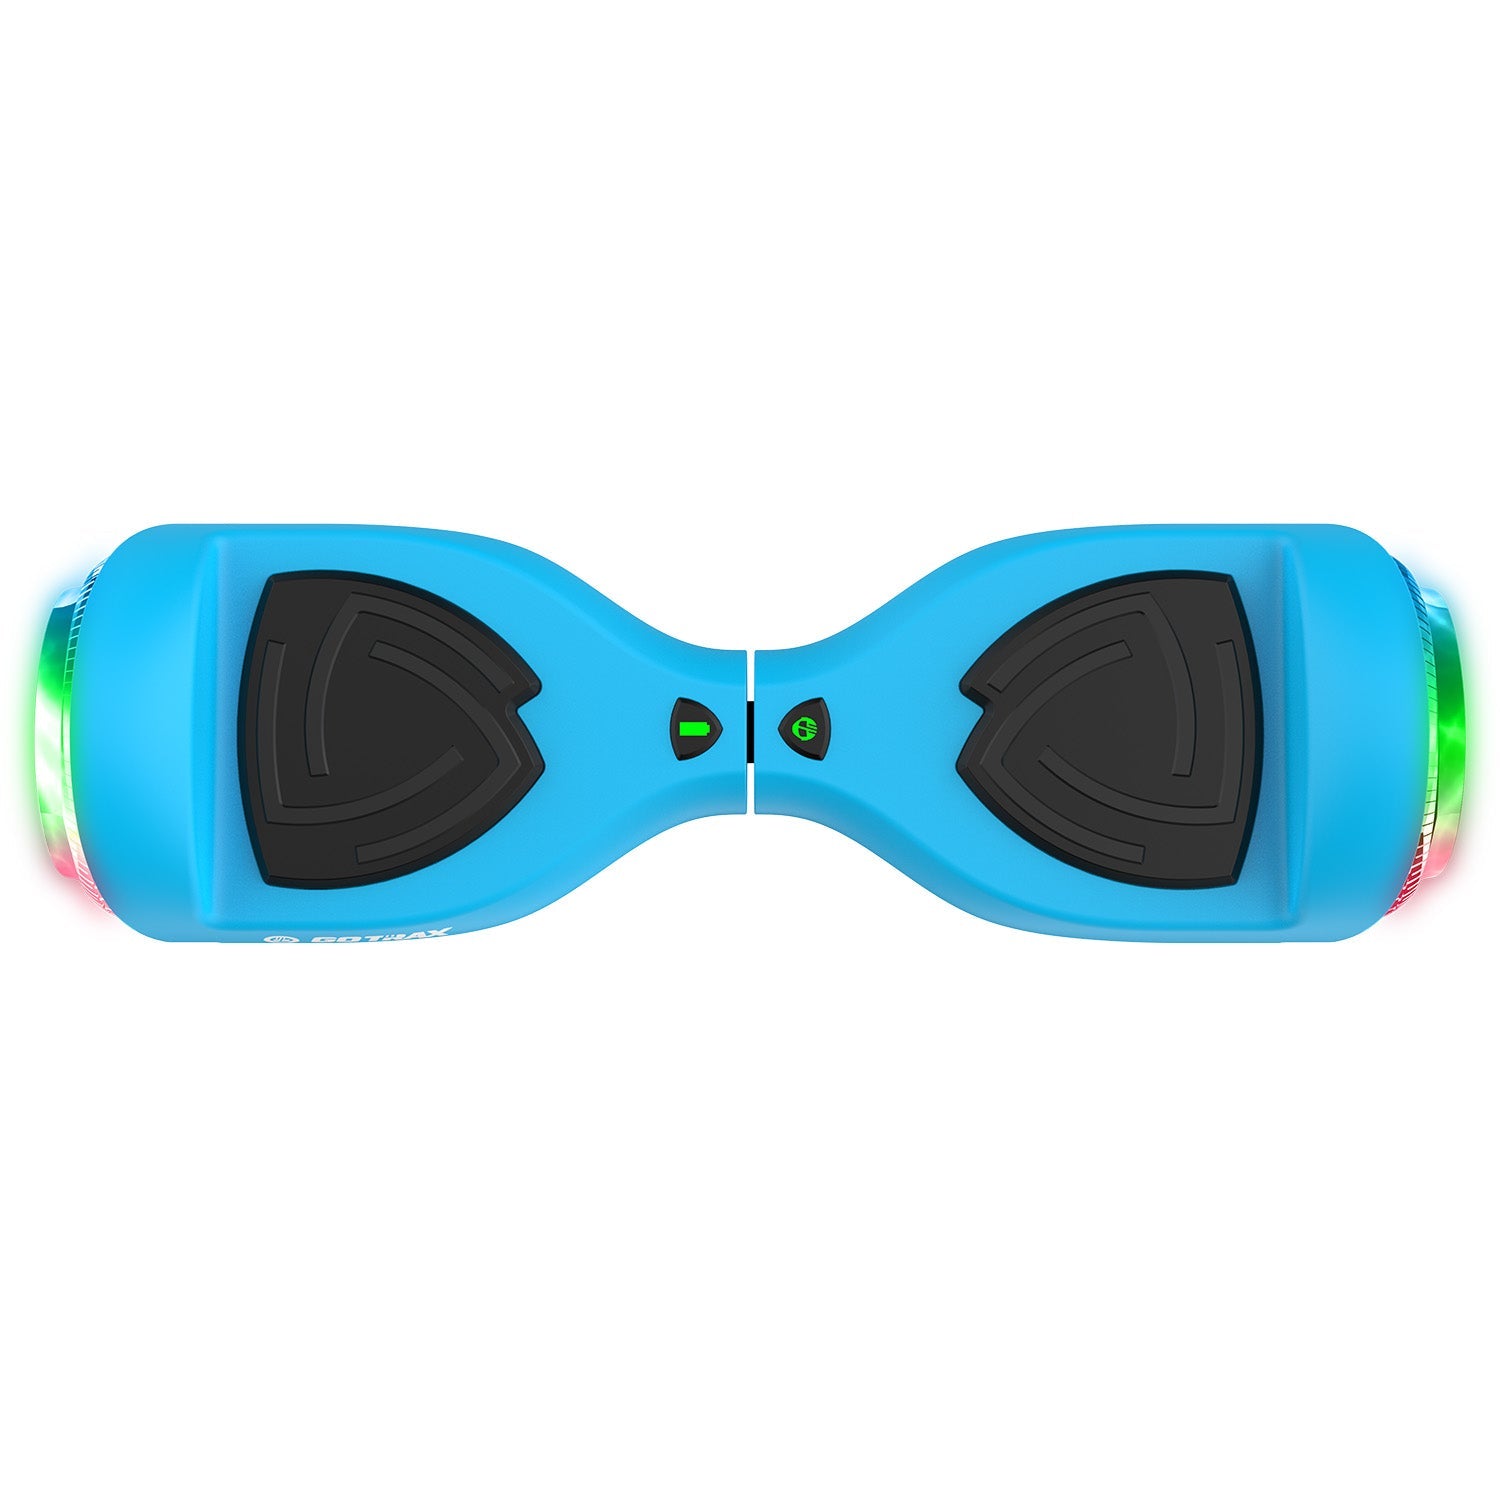 Drift Pro Hoverboard with 6.3" LED Wheels - GOTRAX